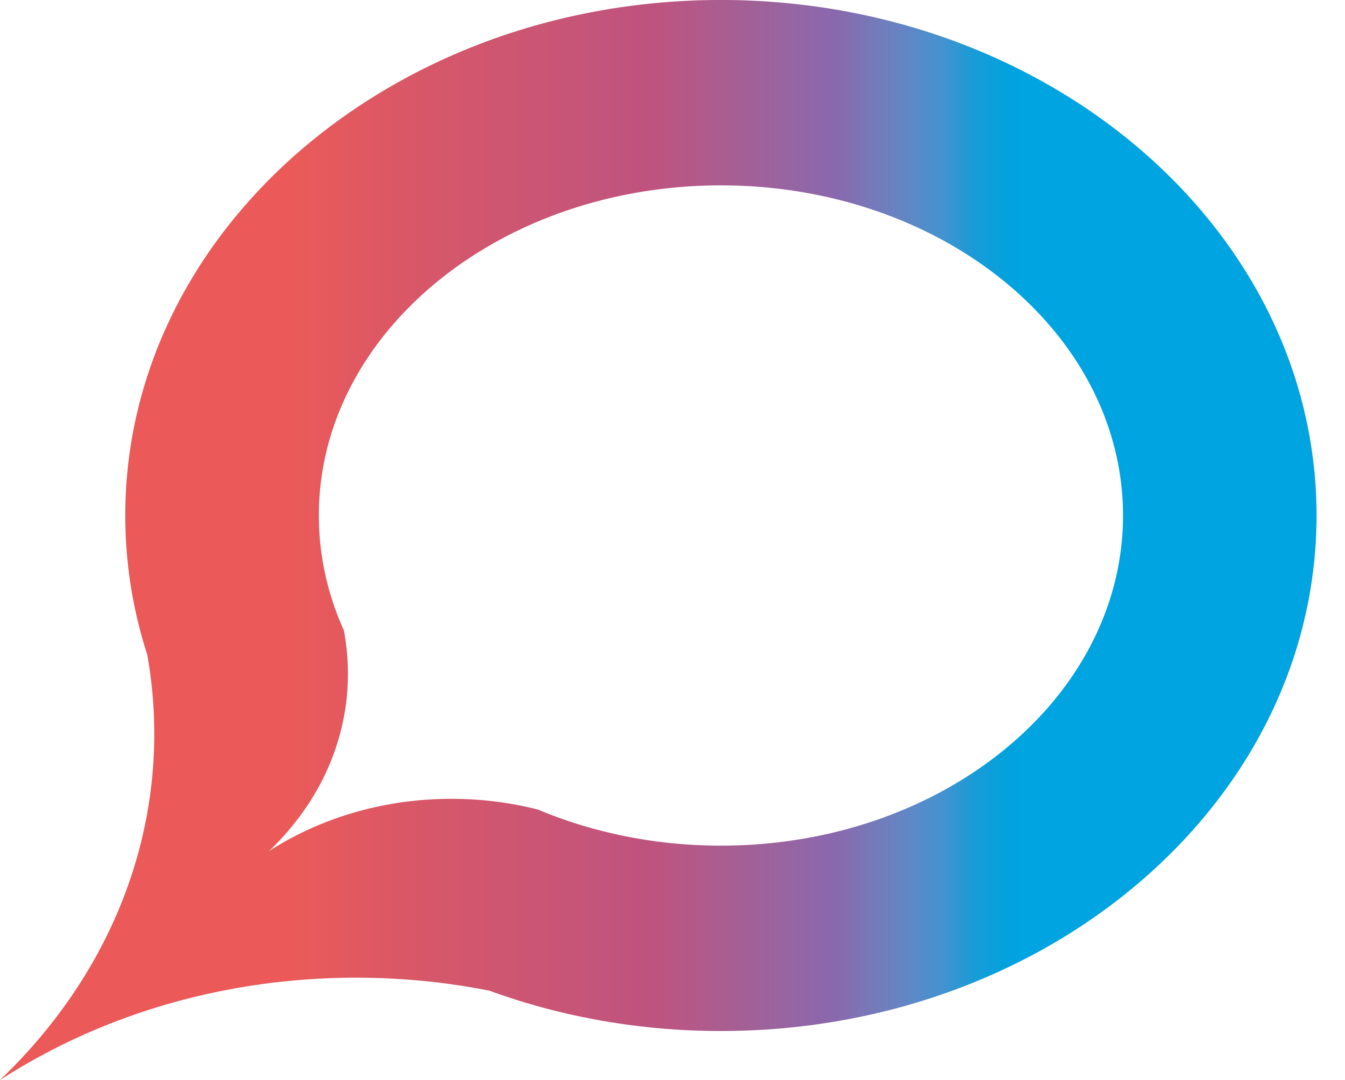 A red and blue speech bubble with a white background